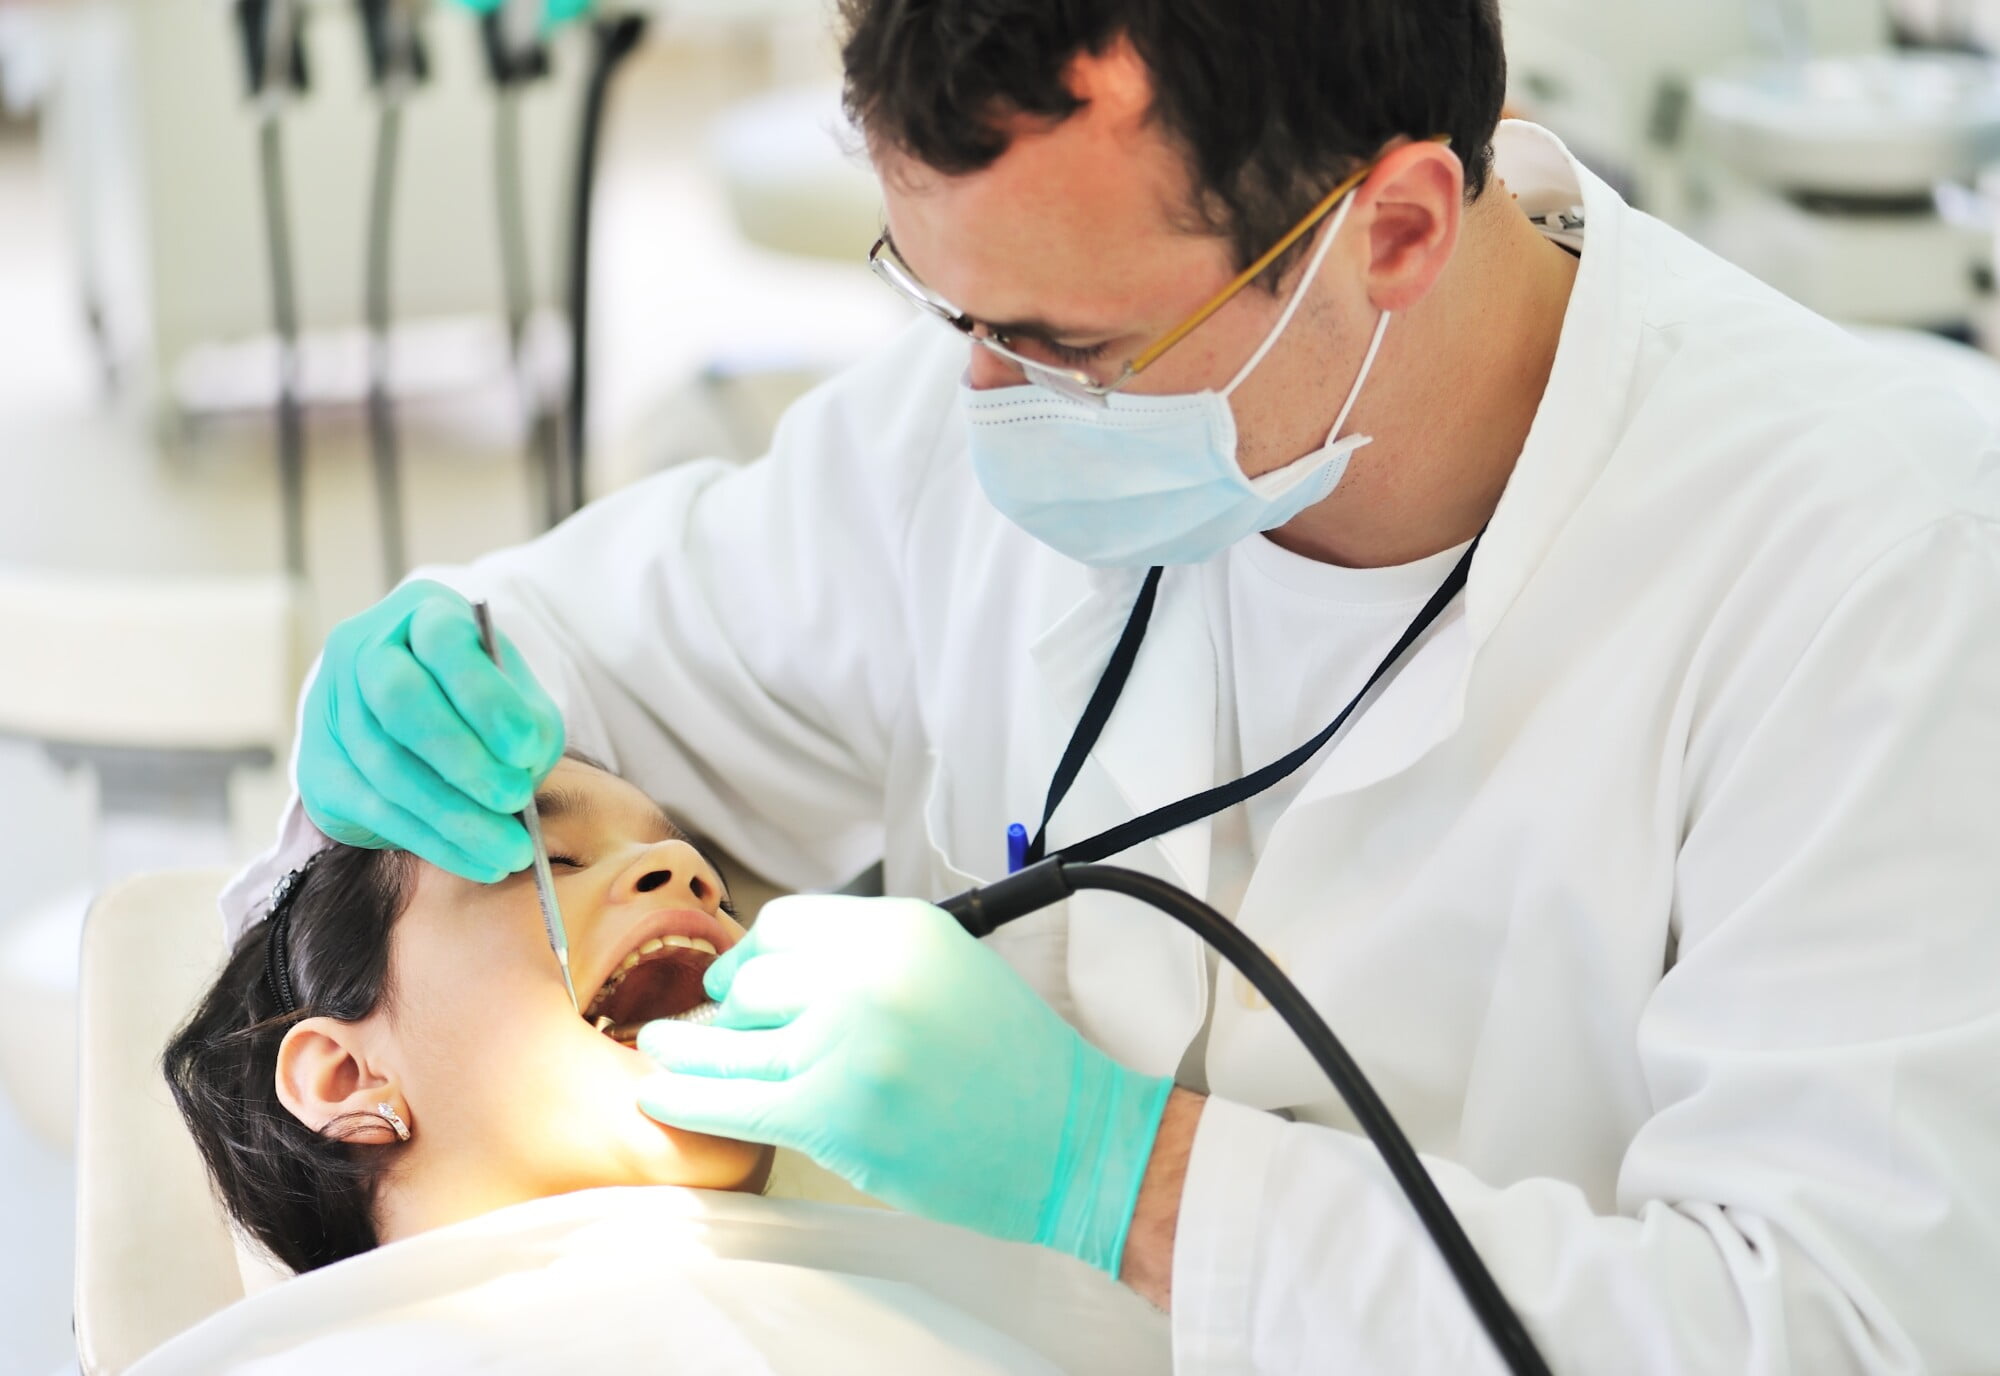 Are you wondering how your dental implant procedure will all work? Learn here what to expect from your dental implant procedure.